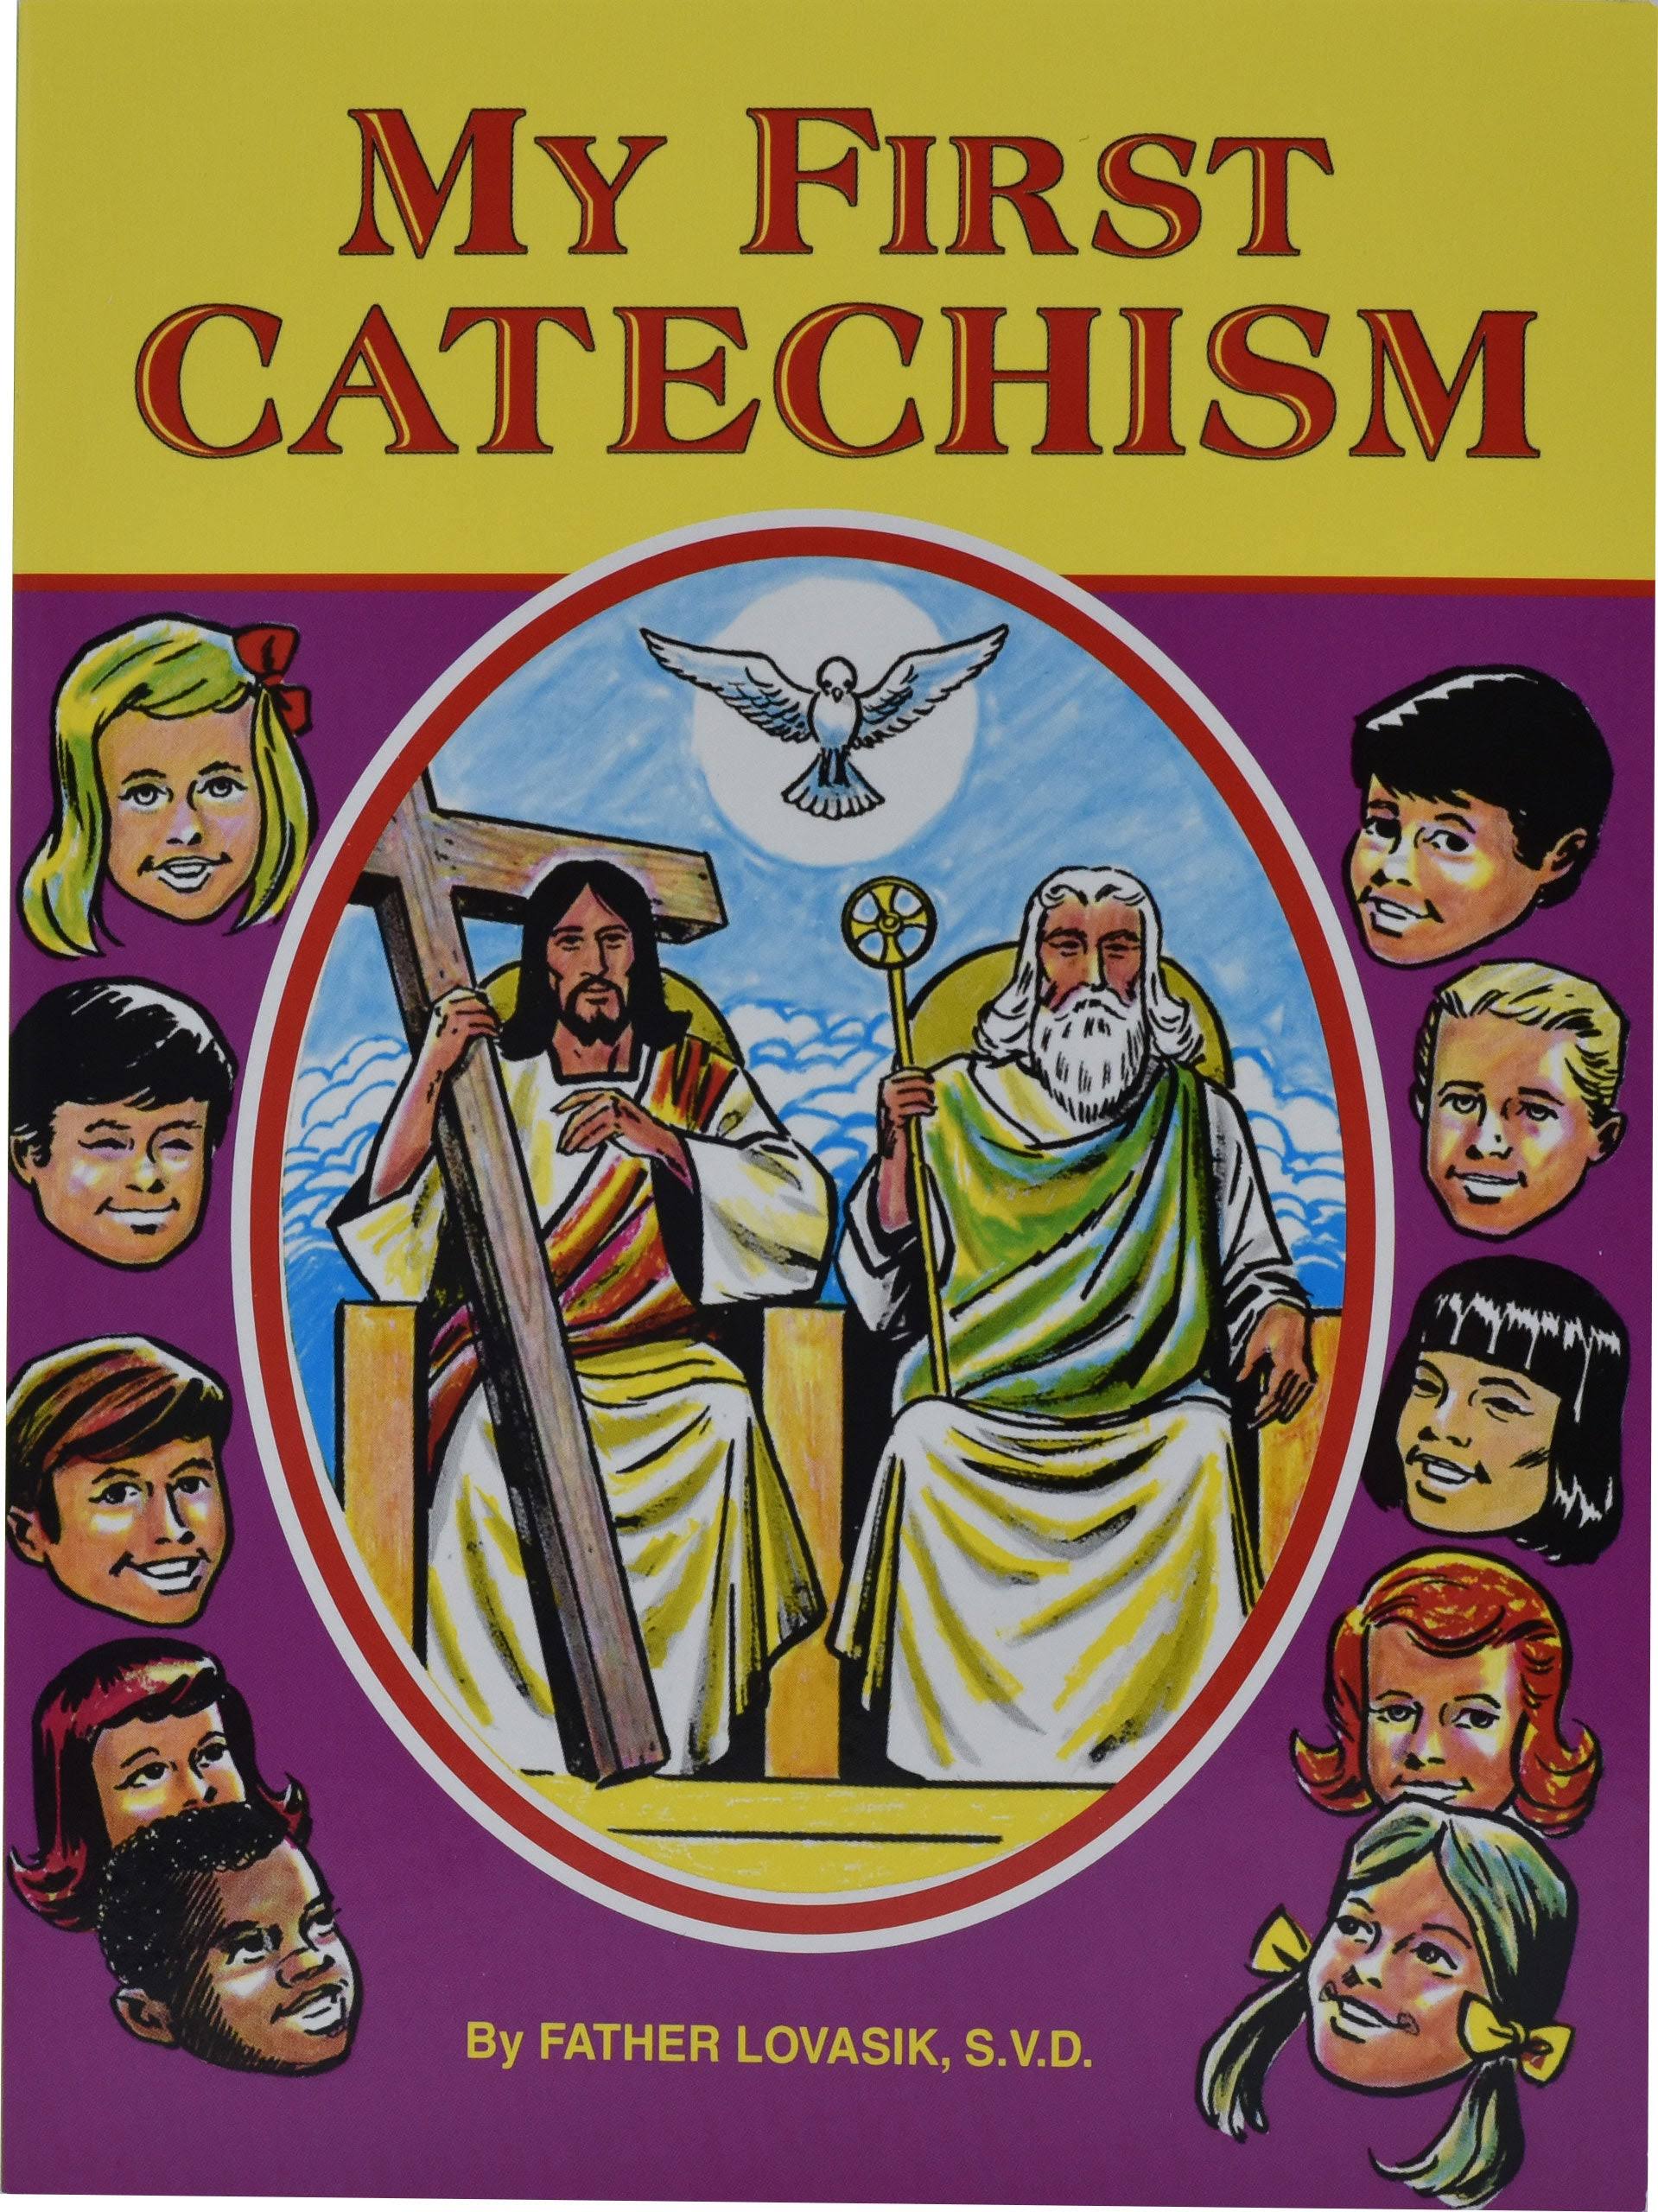 My First Catechism [Book]